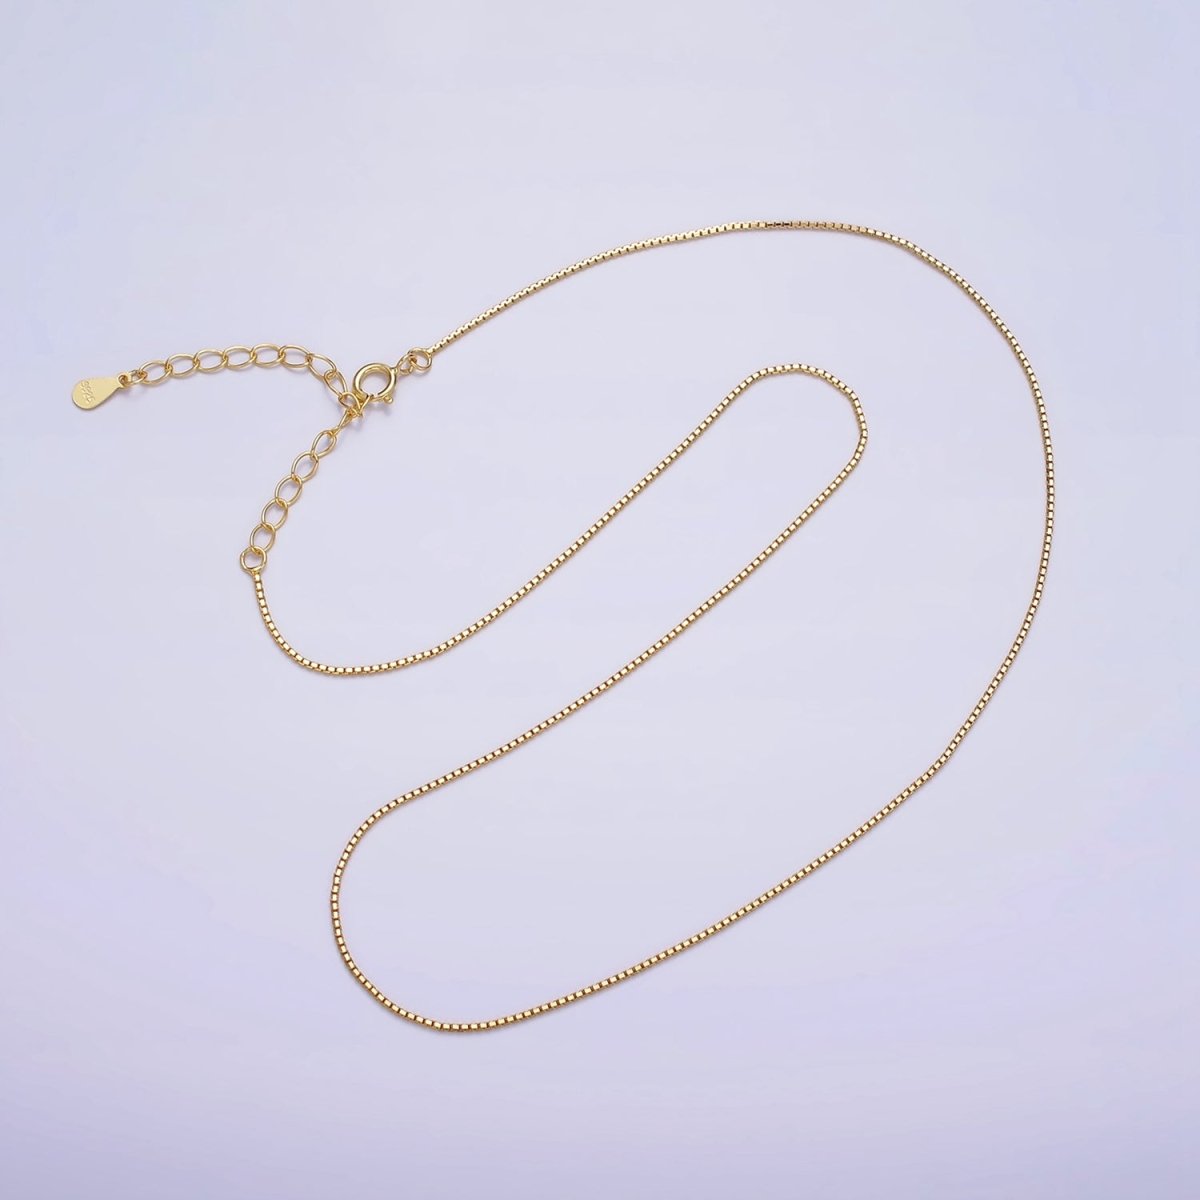 Dainty 24K Gold Vermeil Box Chain Necklace 925 Sterling Silver Necklace Chain w/ Heavy 24K Gold Plated 15.35 inch + 2 inch extender | WA-1982 Clearance Pricing - DLUXCA